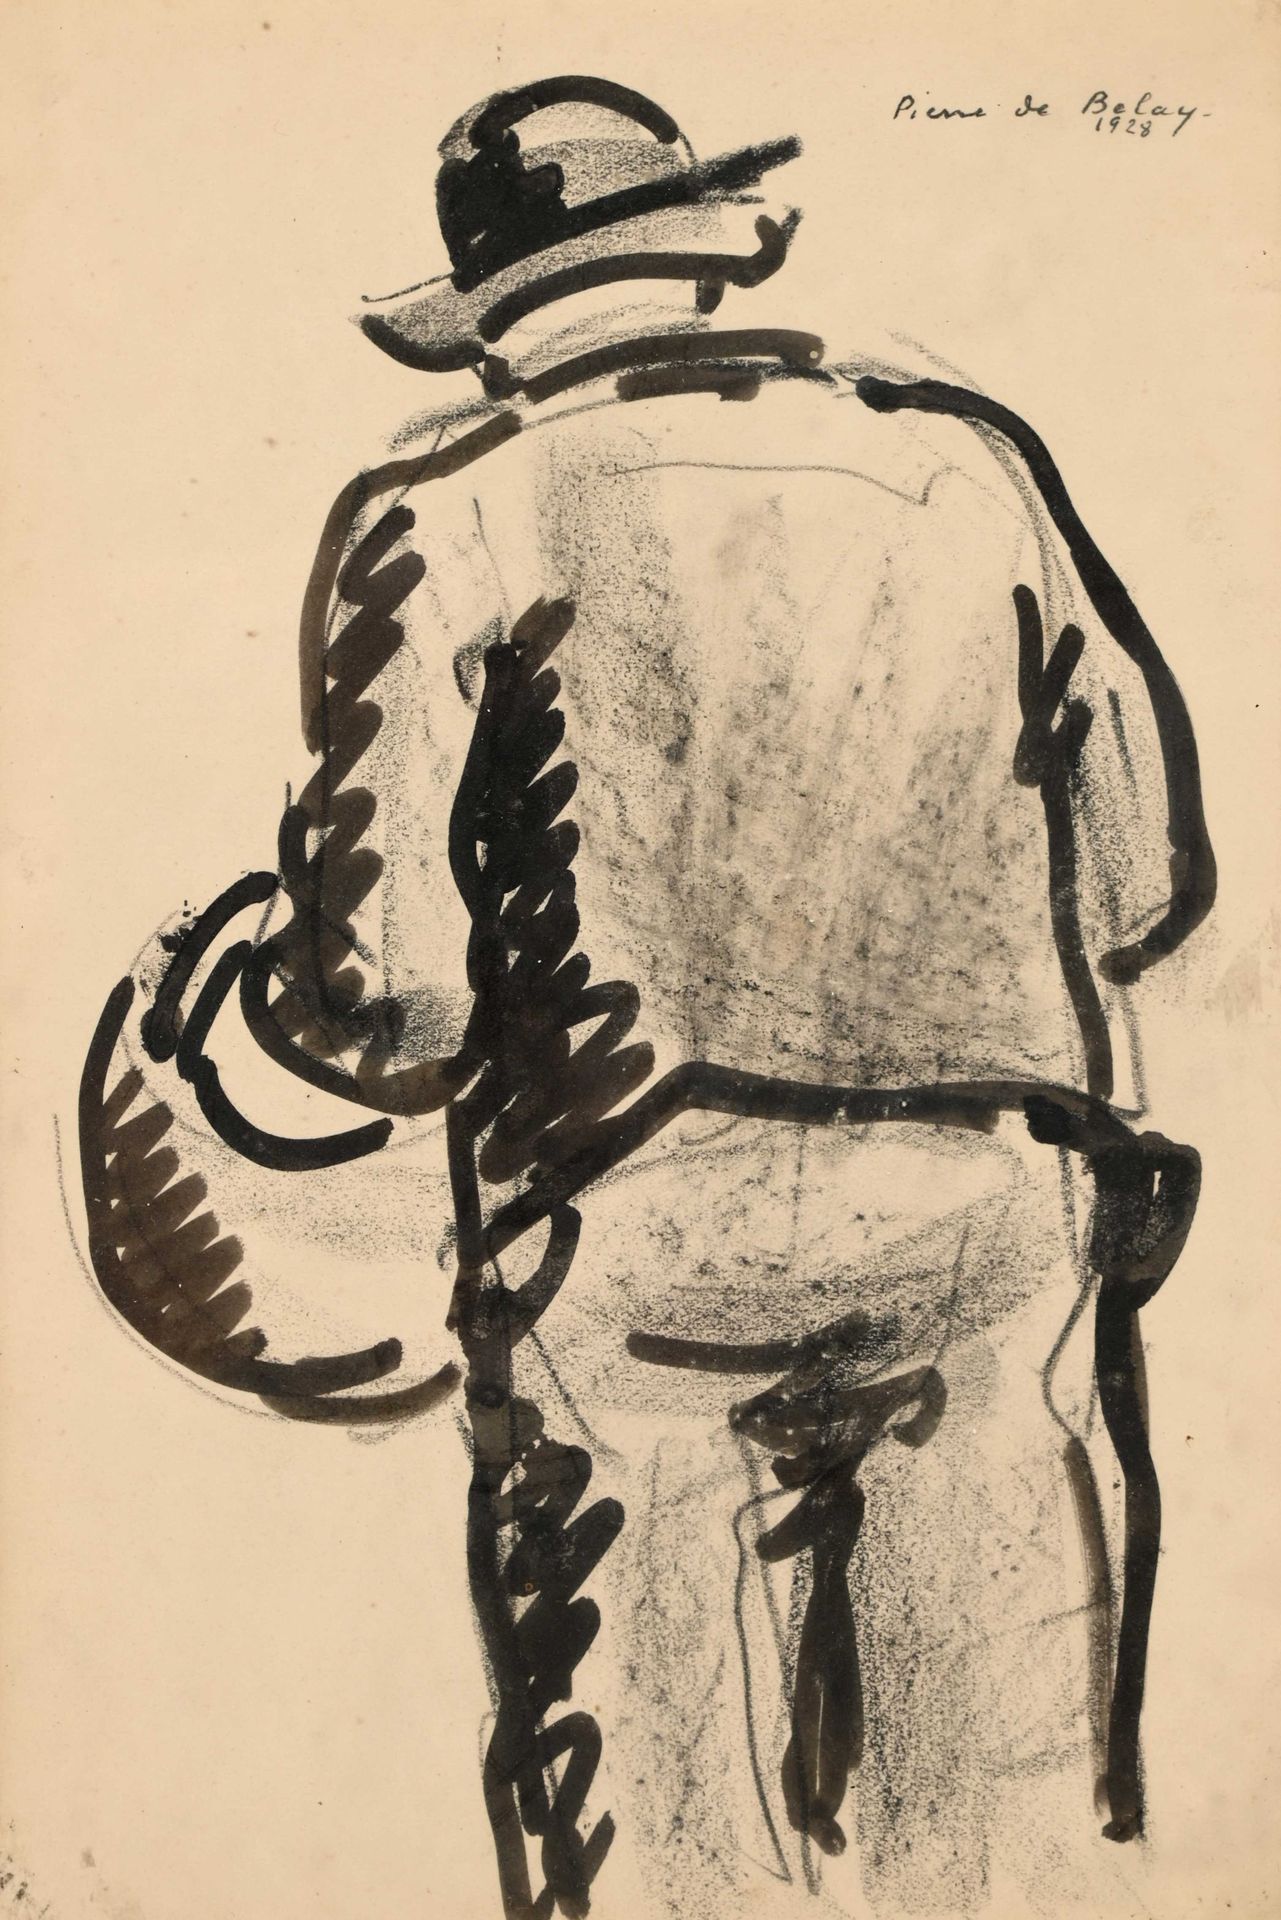 Null Pierre DE BELAY (1890-1947) "Man with basket" charcoal and watercolor drawi&hellip;